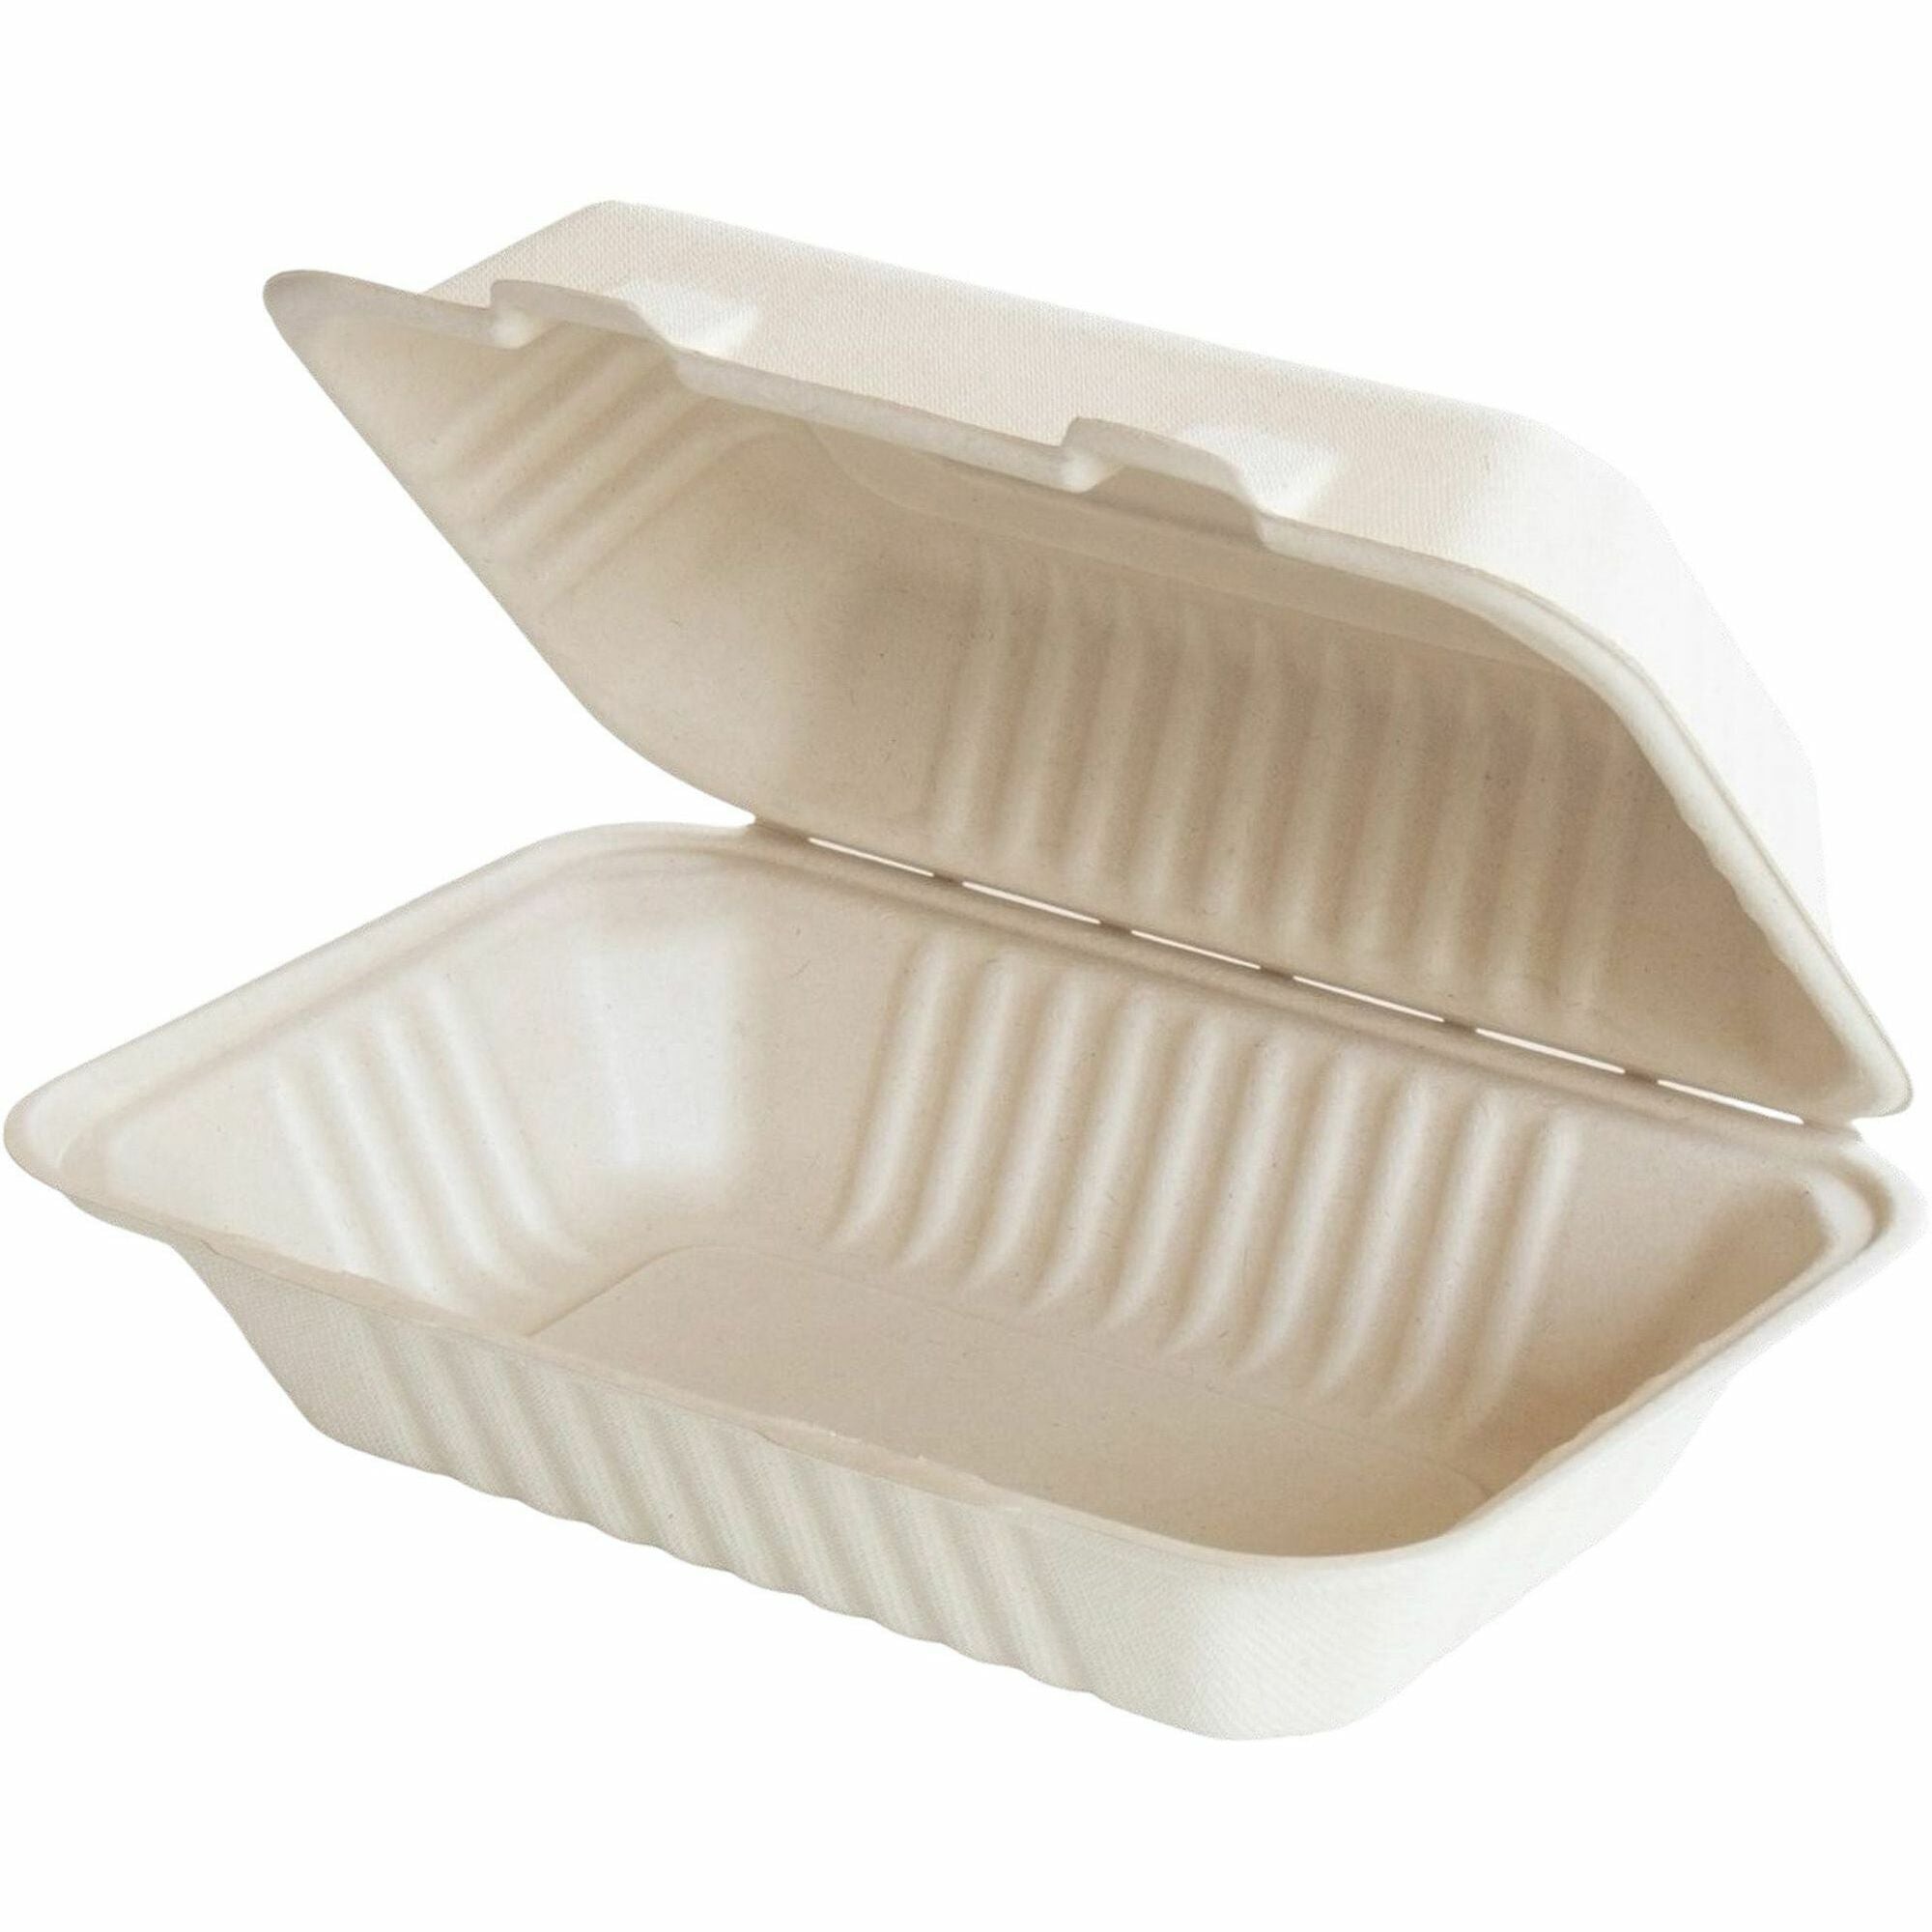 BluTable 27 oz Portable Clamshell Containers - Food - Natural - Molded Fiber, Sugarcane Fiber Body - 250 / Carton - 1